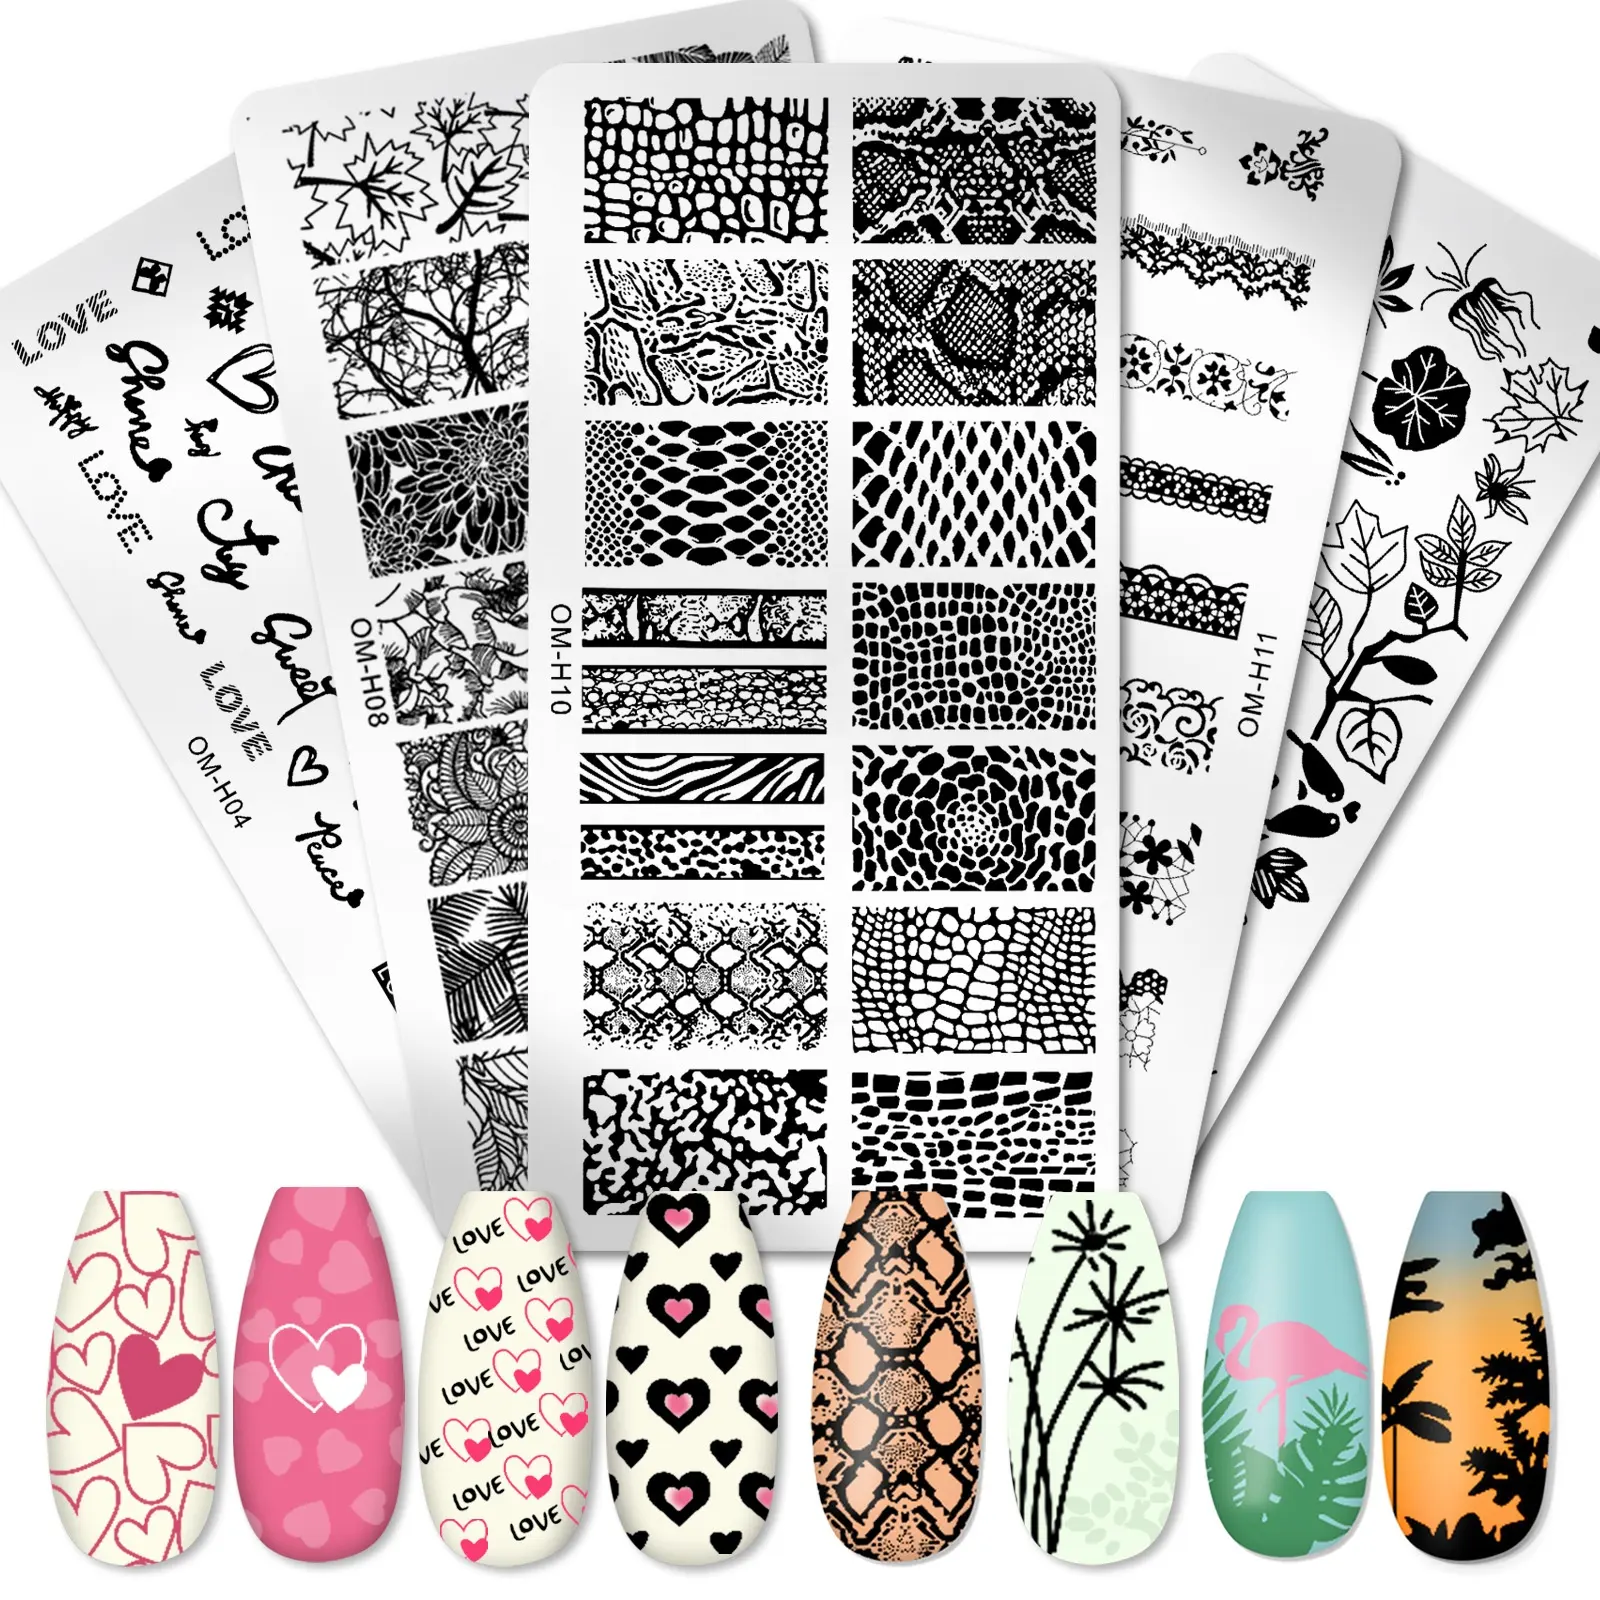 Nail Art Templates Stamping Plate Design Flower Animal Glass Temperature Lace Stamp Templates Image Nail Stamping Plate